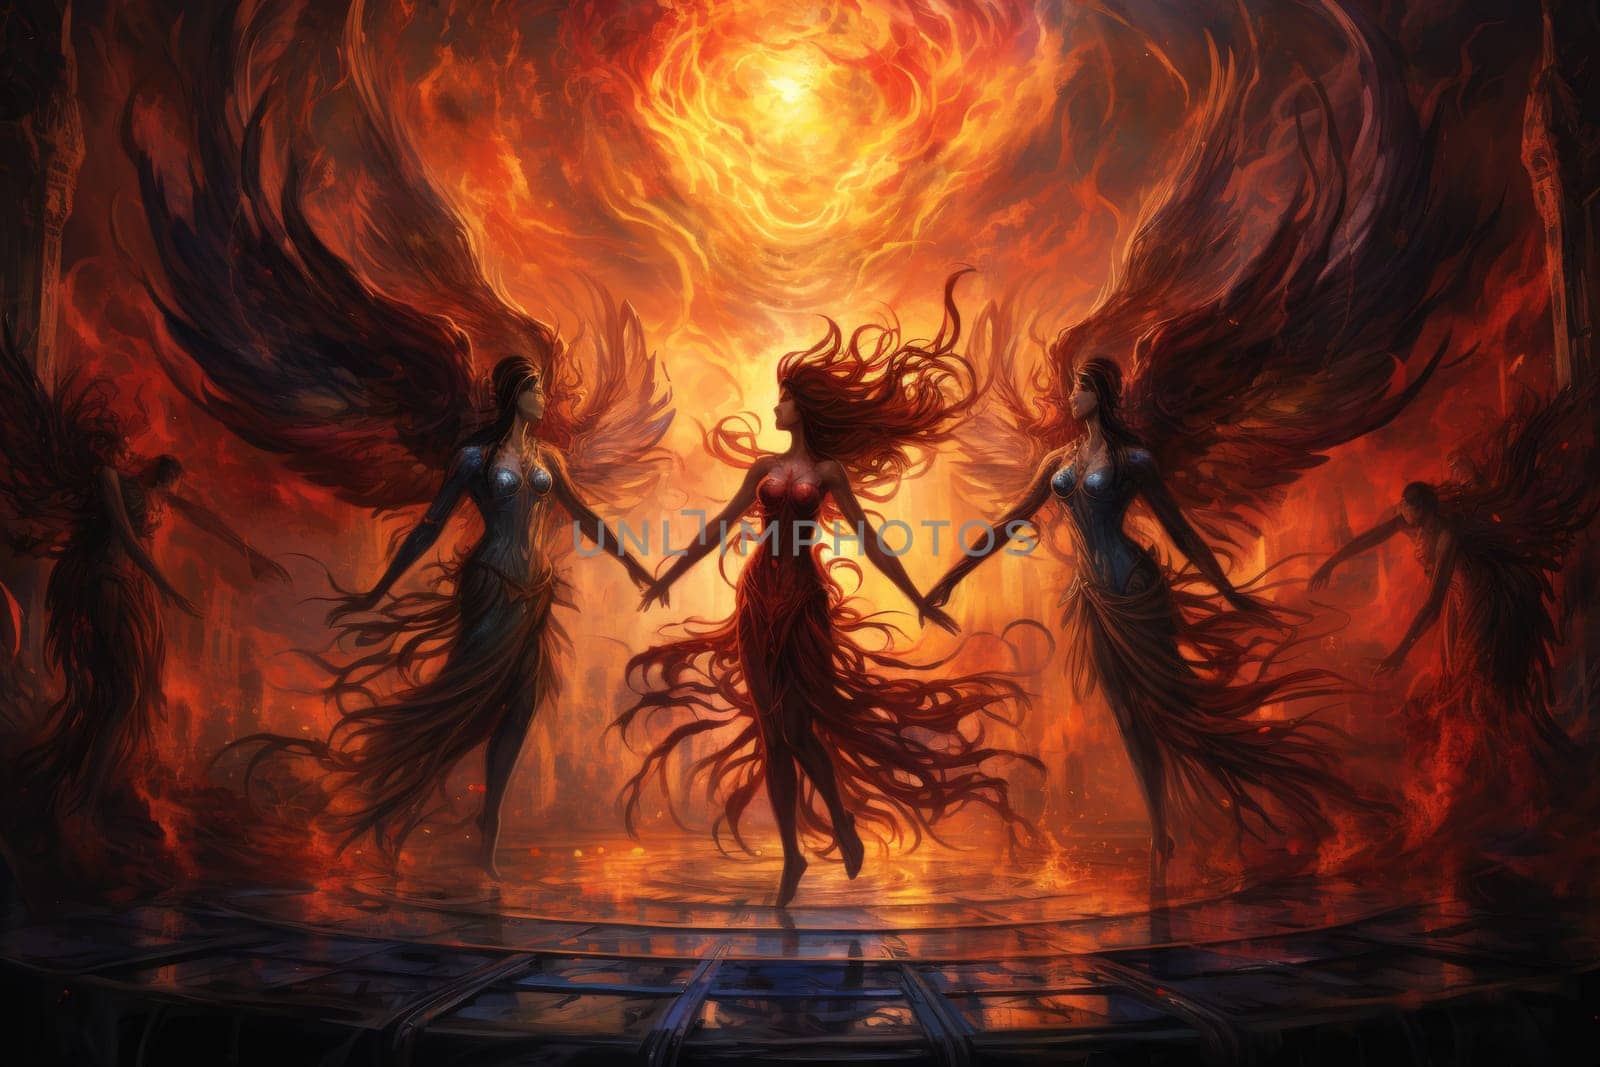 Within the realm of fantasy, elegant phoenix dancers grace the stage, their mesmerizing performances engulfed in flames.